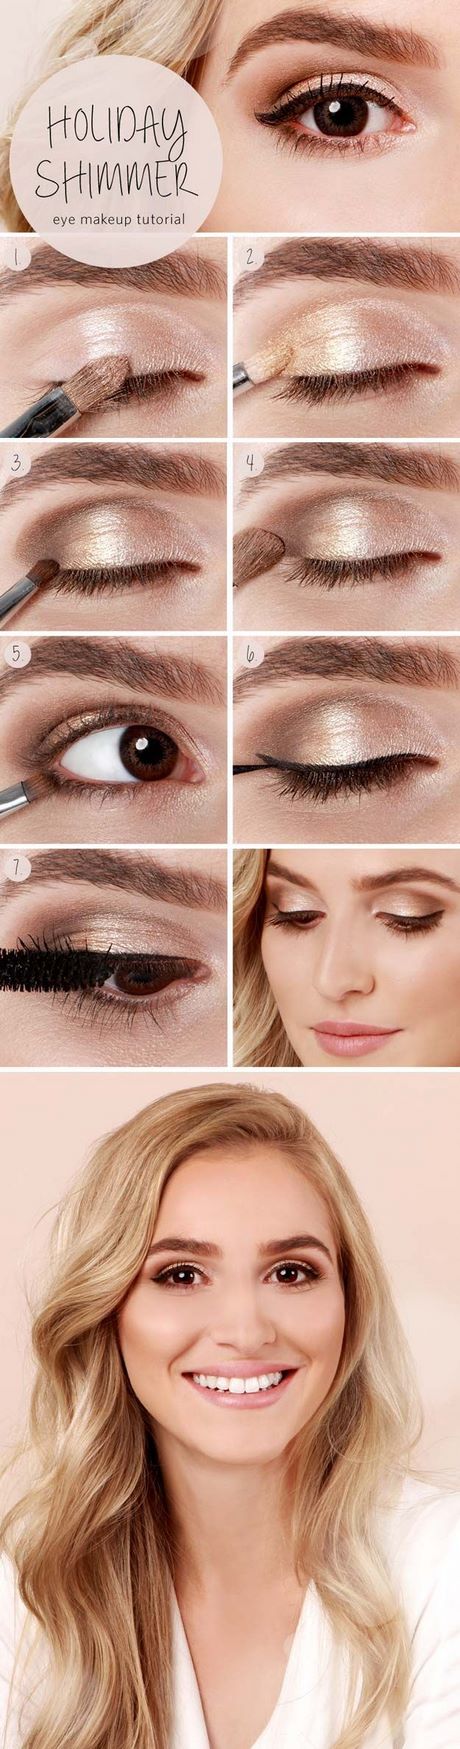 easy-holiday-makeup-tutorial-65_16 Easy holiday make-up tutorial